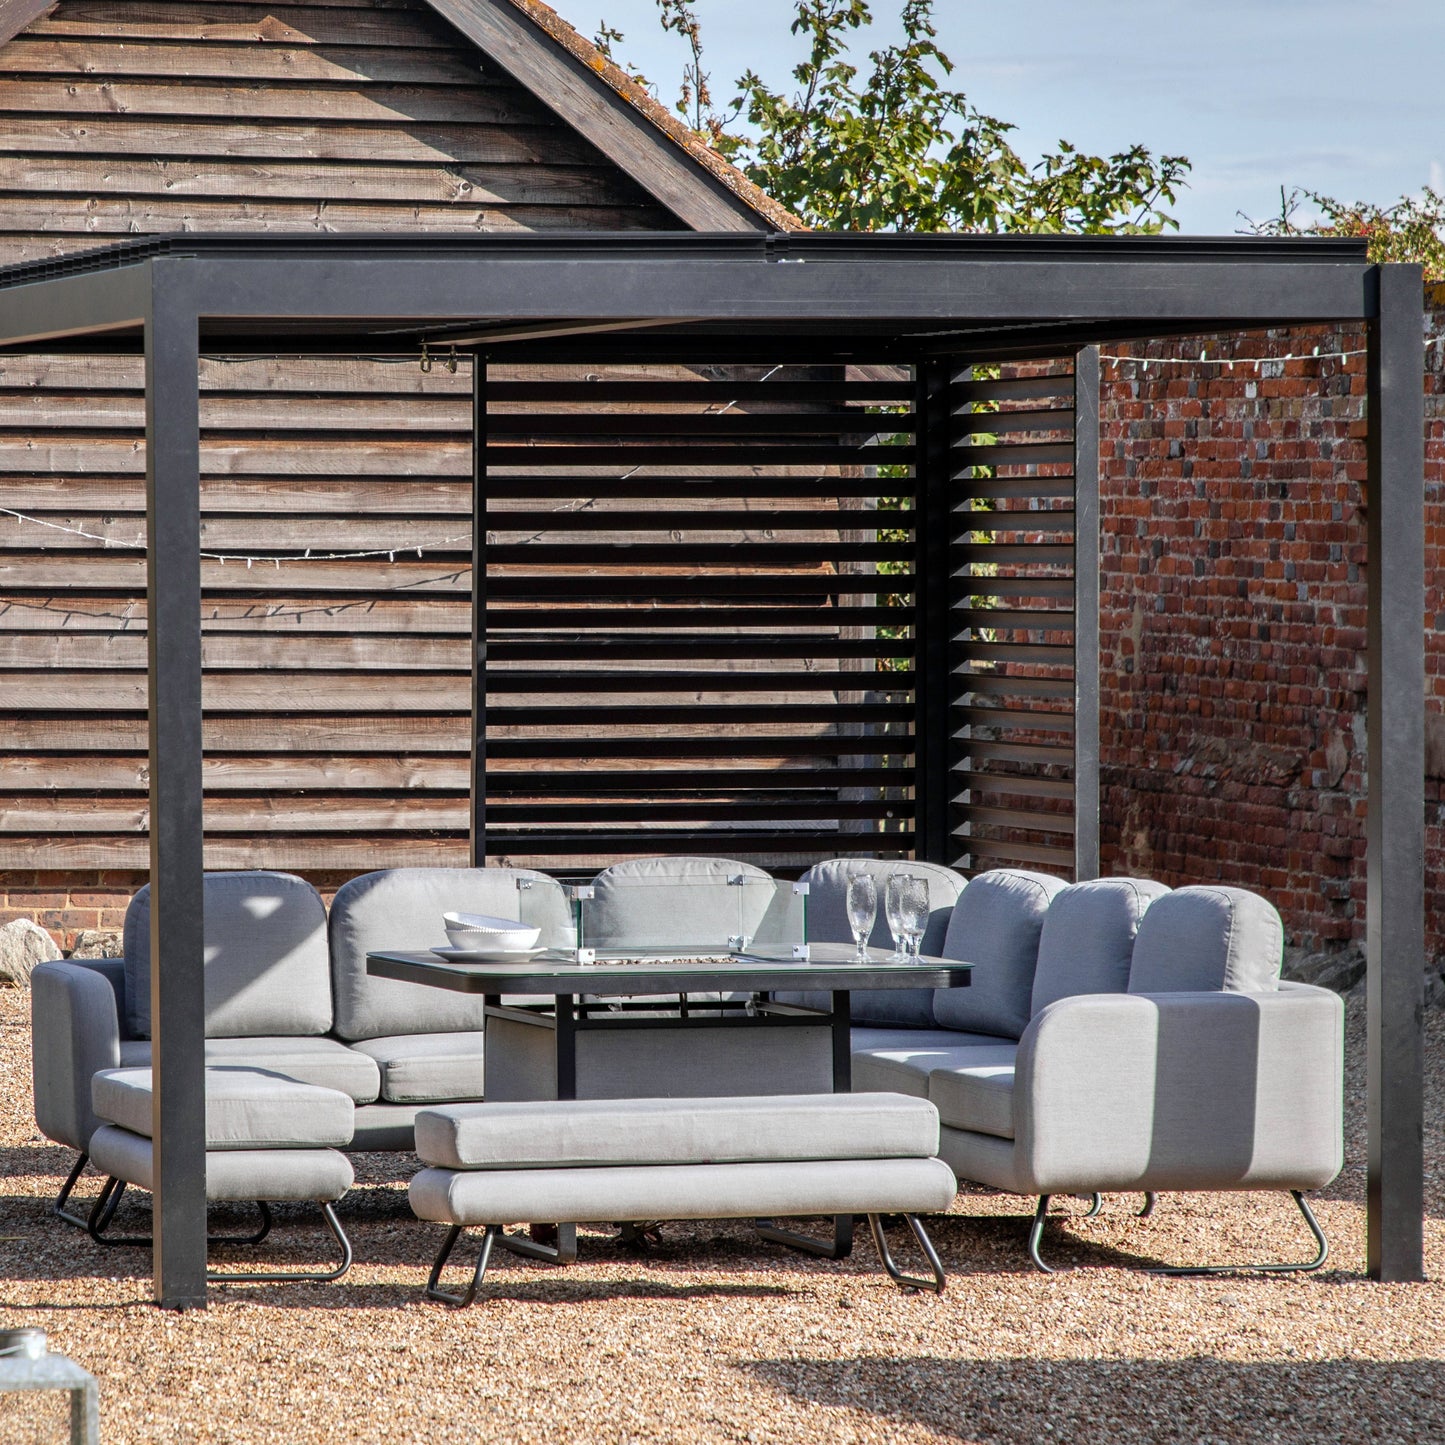 A Kikiathome.co.uk patio set with a Dittisham Pergola Louvre Screen Black 900x2180mm table and chairs for interior decor.